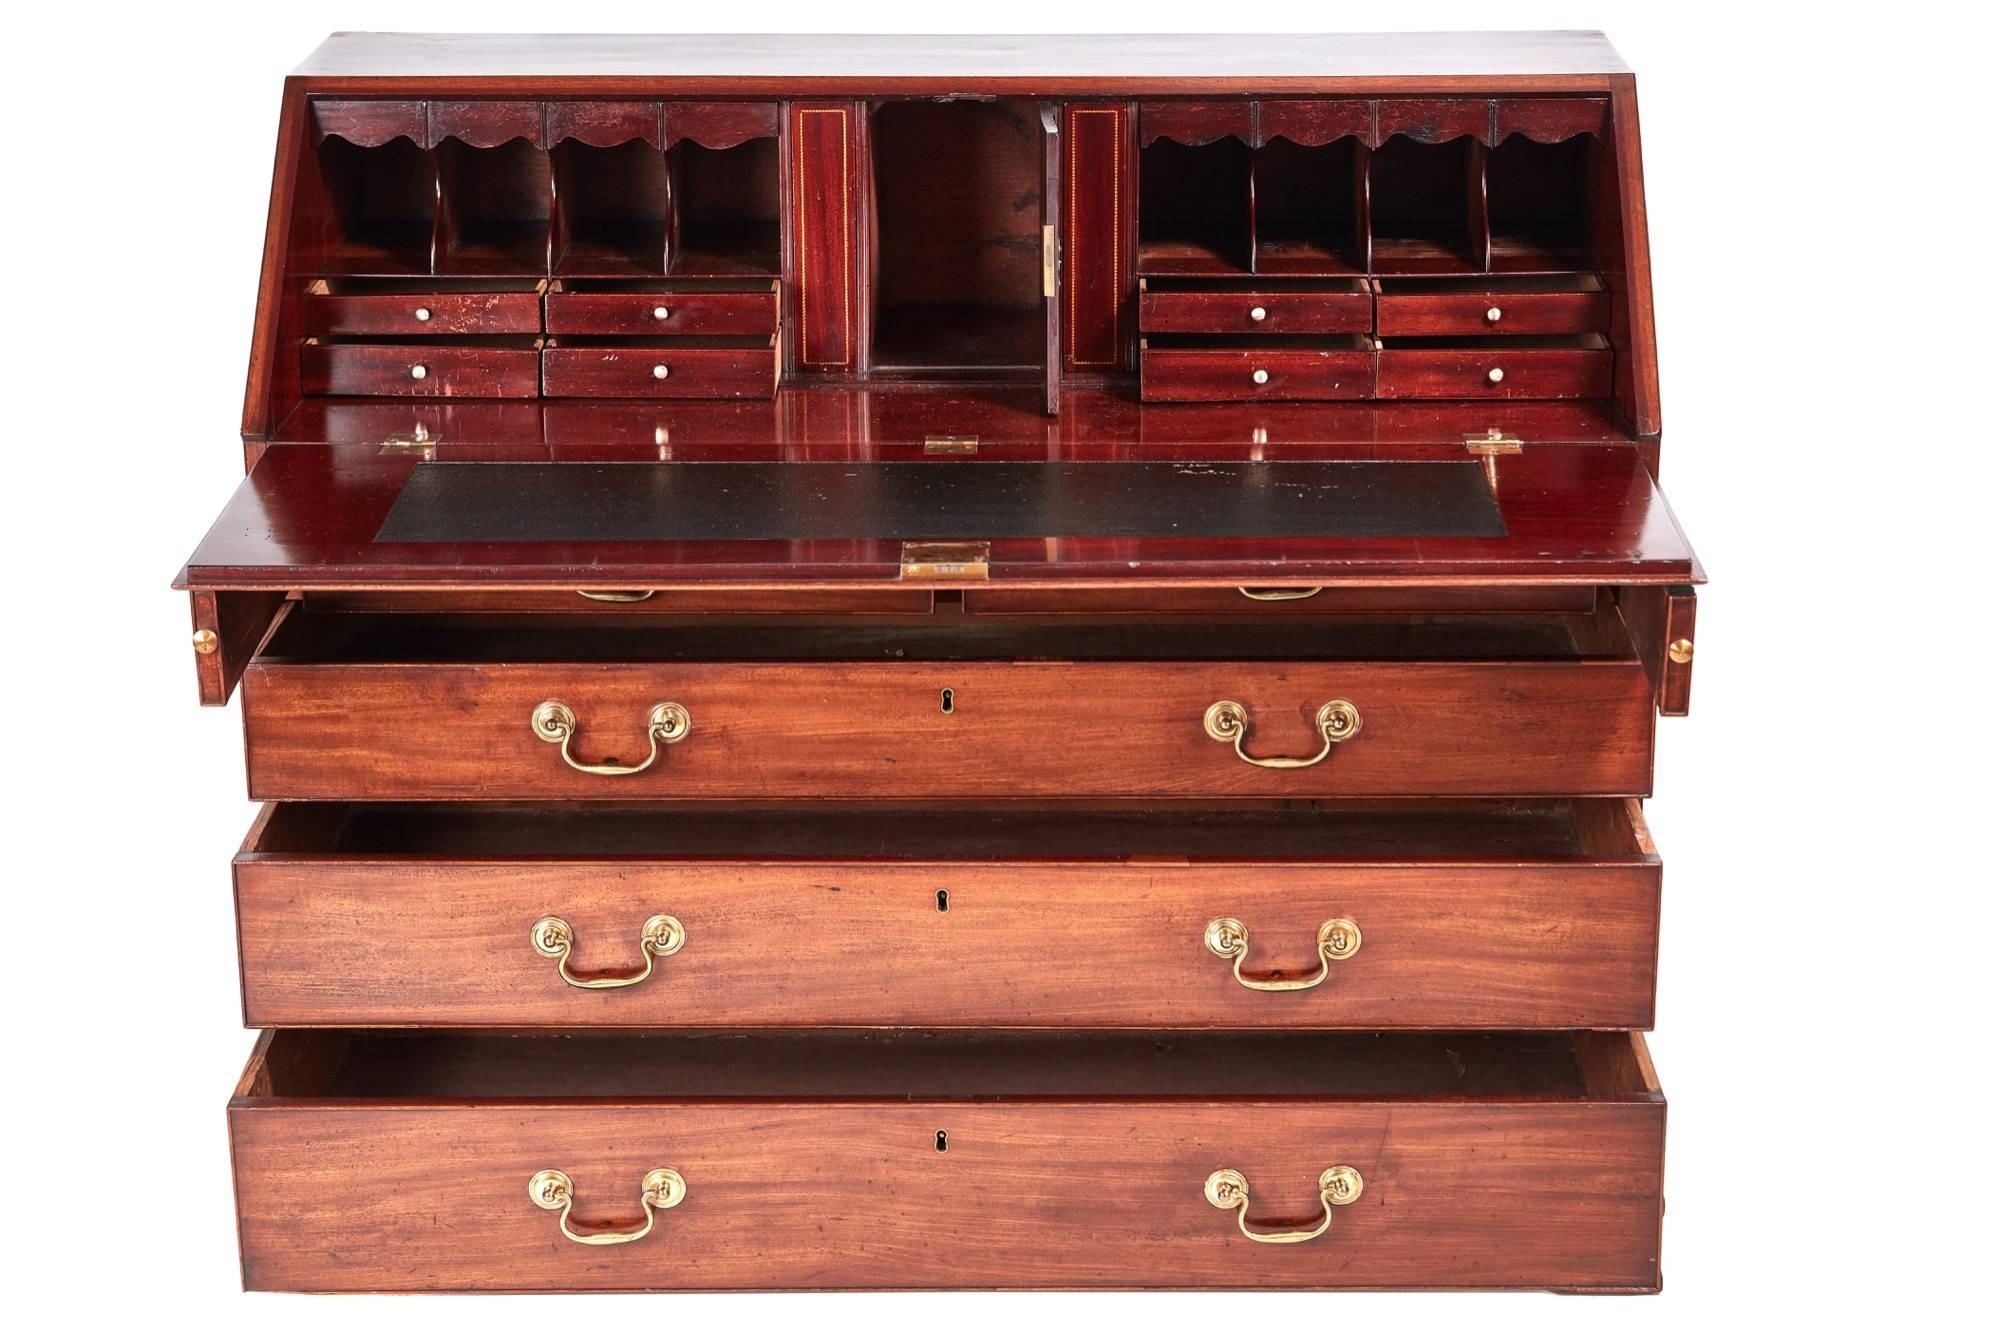 Outstanding quality 18th century mahogany bureau, having four long drawers with original brass handles, the mahogany full opens to reveal a lovely fitted interior, standing on original ogee bracket feet.
Lovely color and condition.
Measures: 48